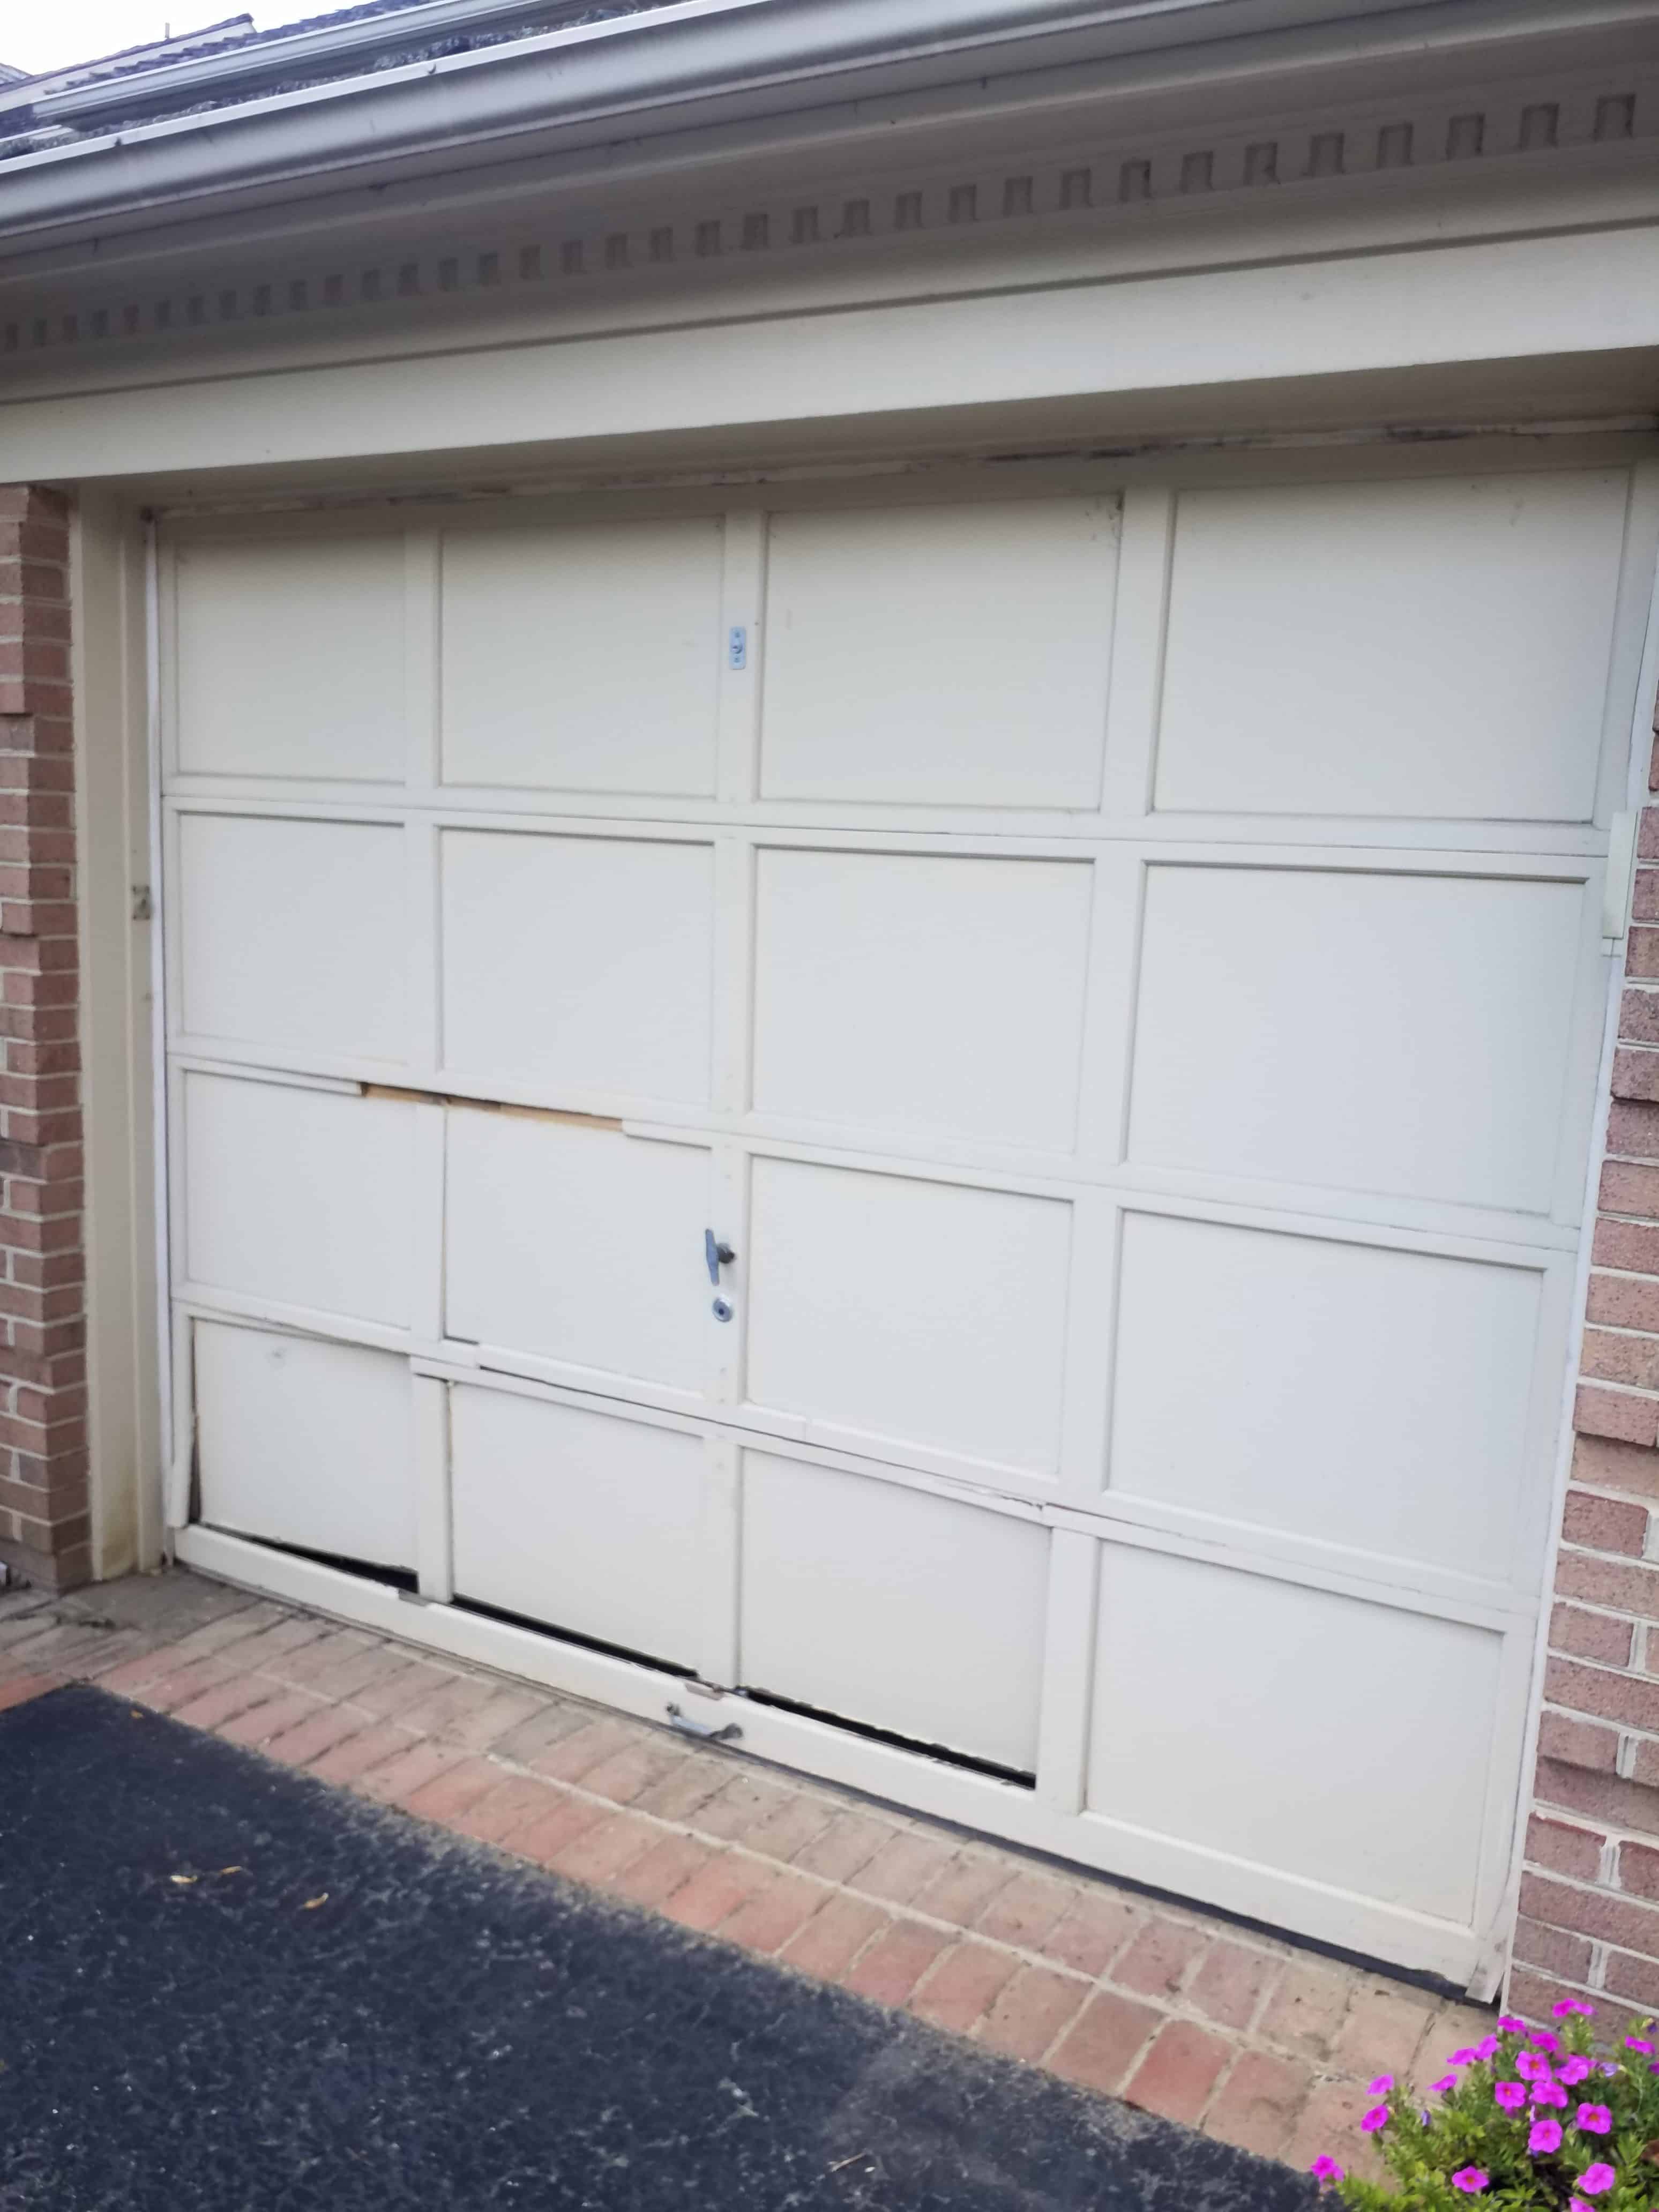 Top 7 Reasons Why Your Garage Door Is Not Closing All The Way